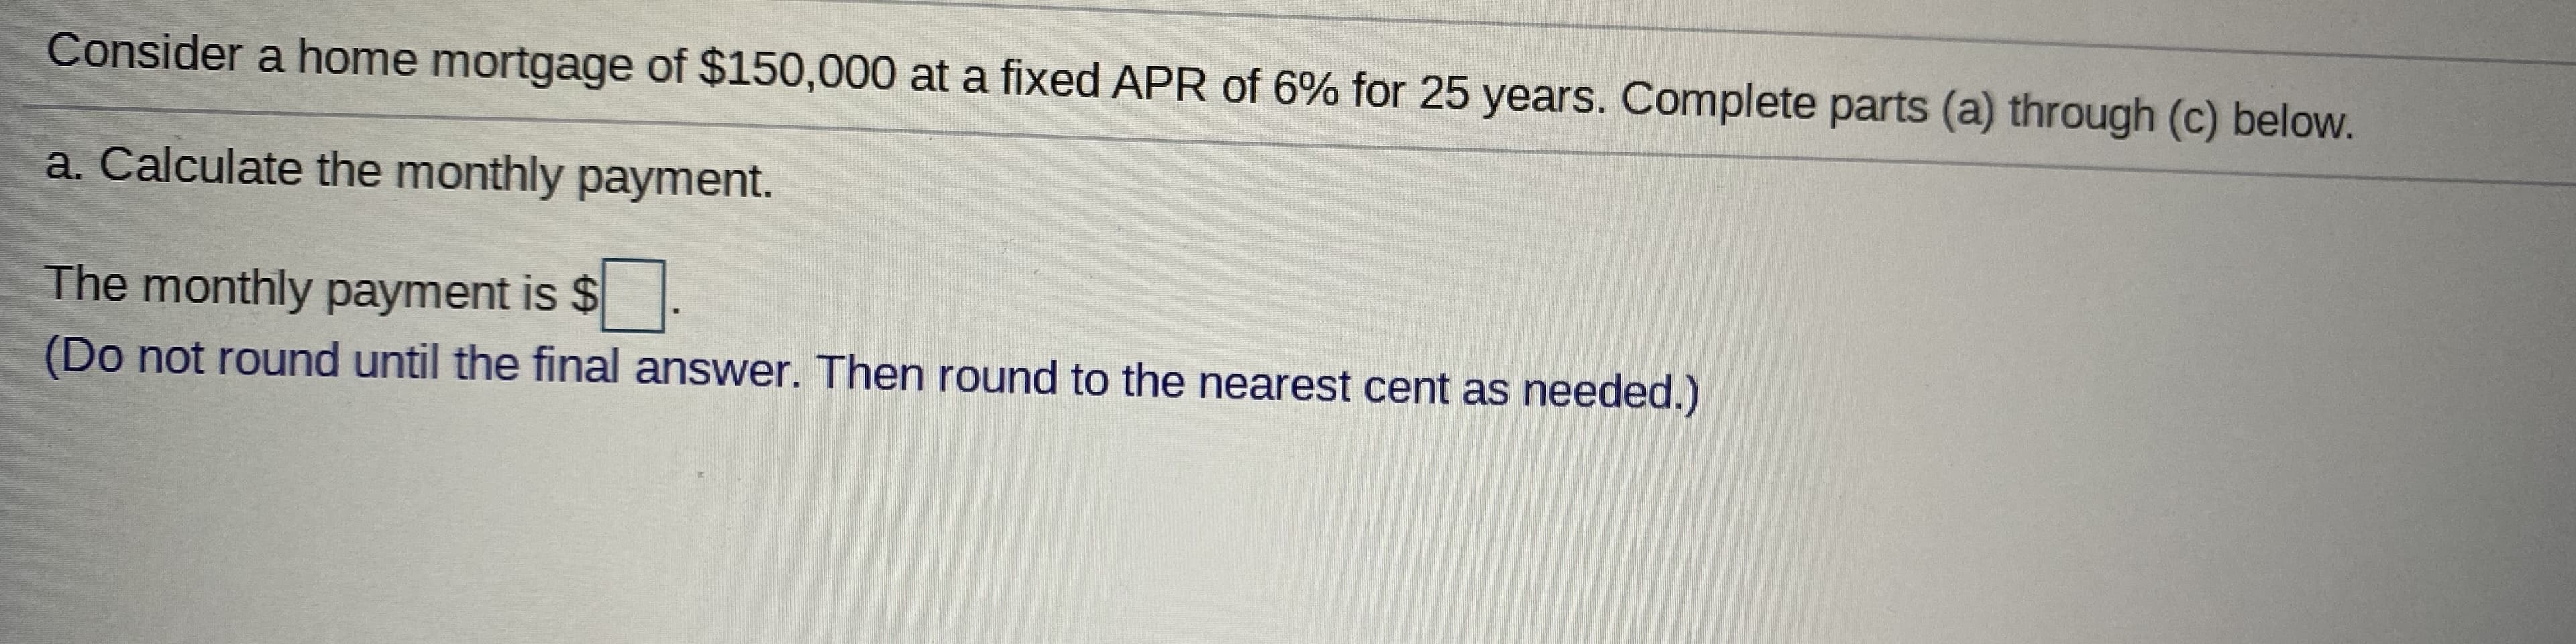 Consider a home mortgage of $150,000 at a fixed APR of 6% for 25 years. Complete parts (a) through (c) below.
a. Calculate the monthly payment.
The monthly payment is $.
(Do not round until the final answer. Then round to the nearest cent as needed.)
